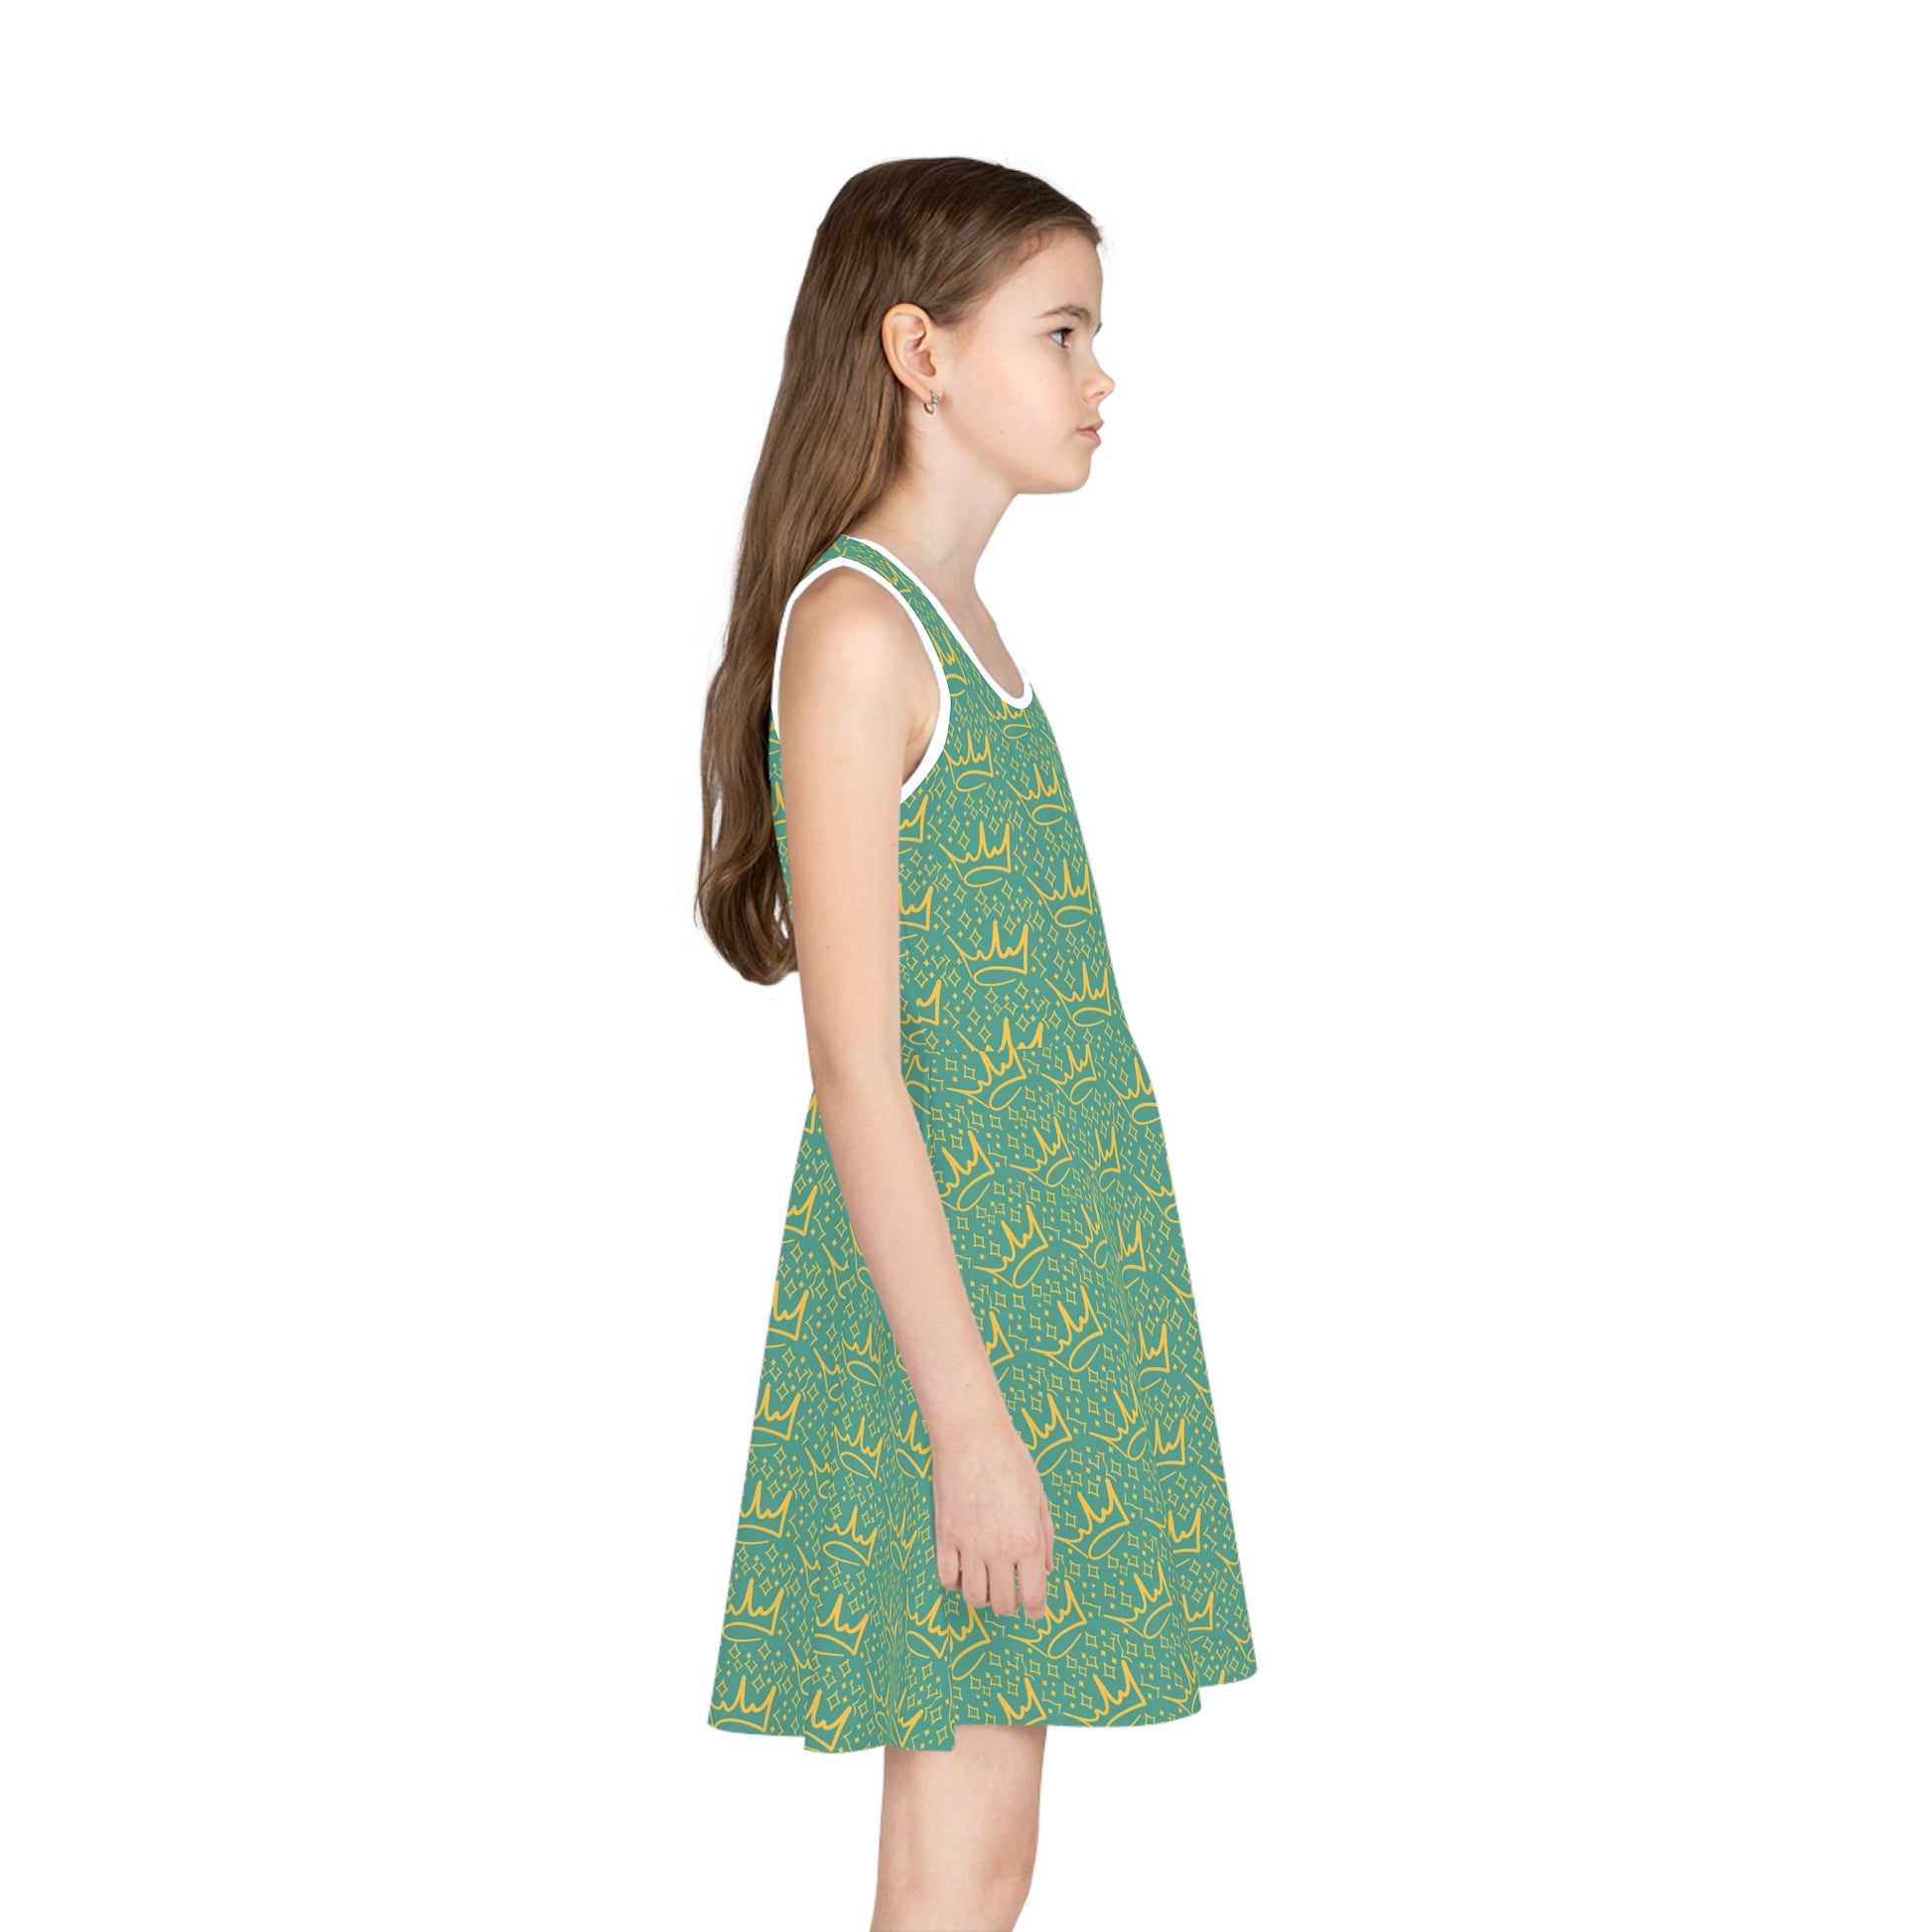 Brave Like Esther Girls' Dress - Friends of the Faith